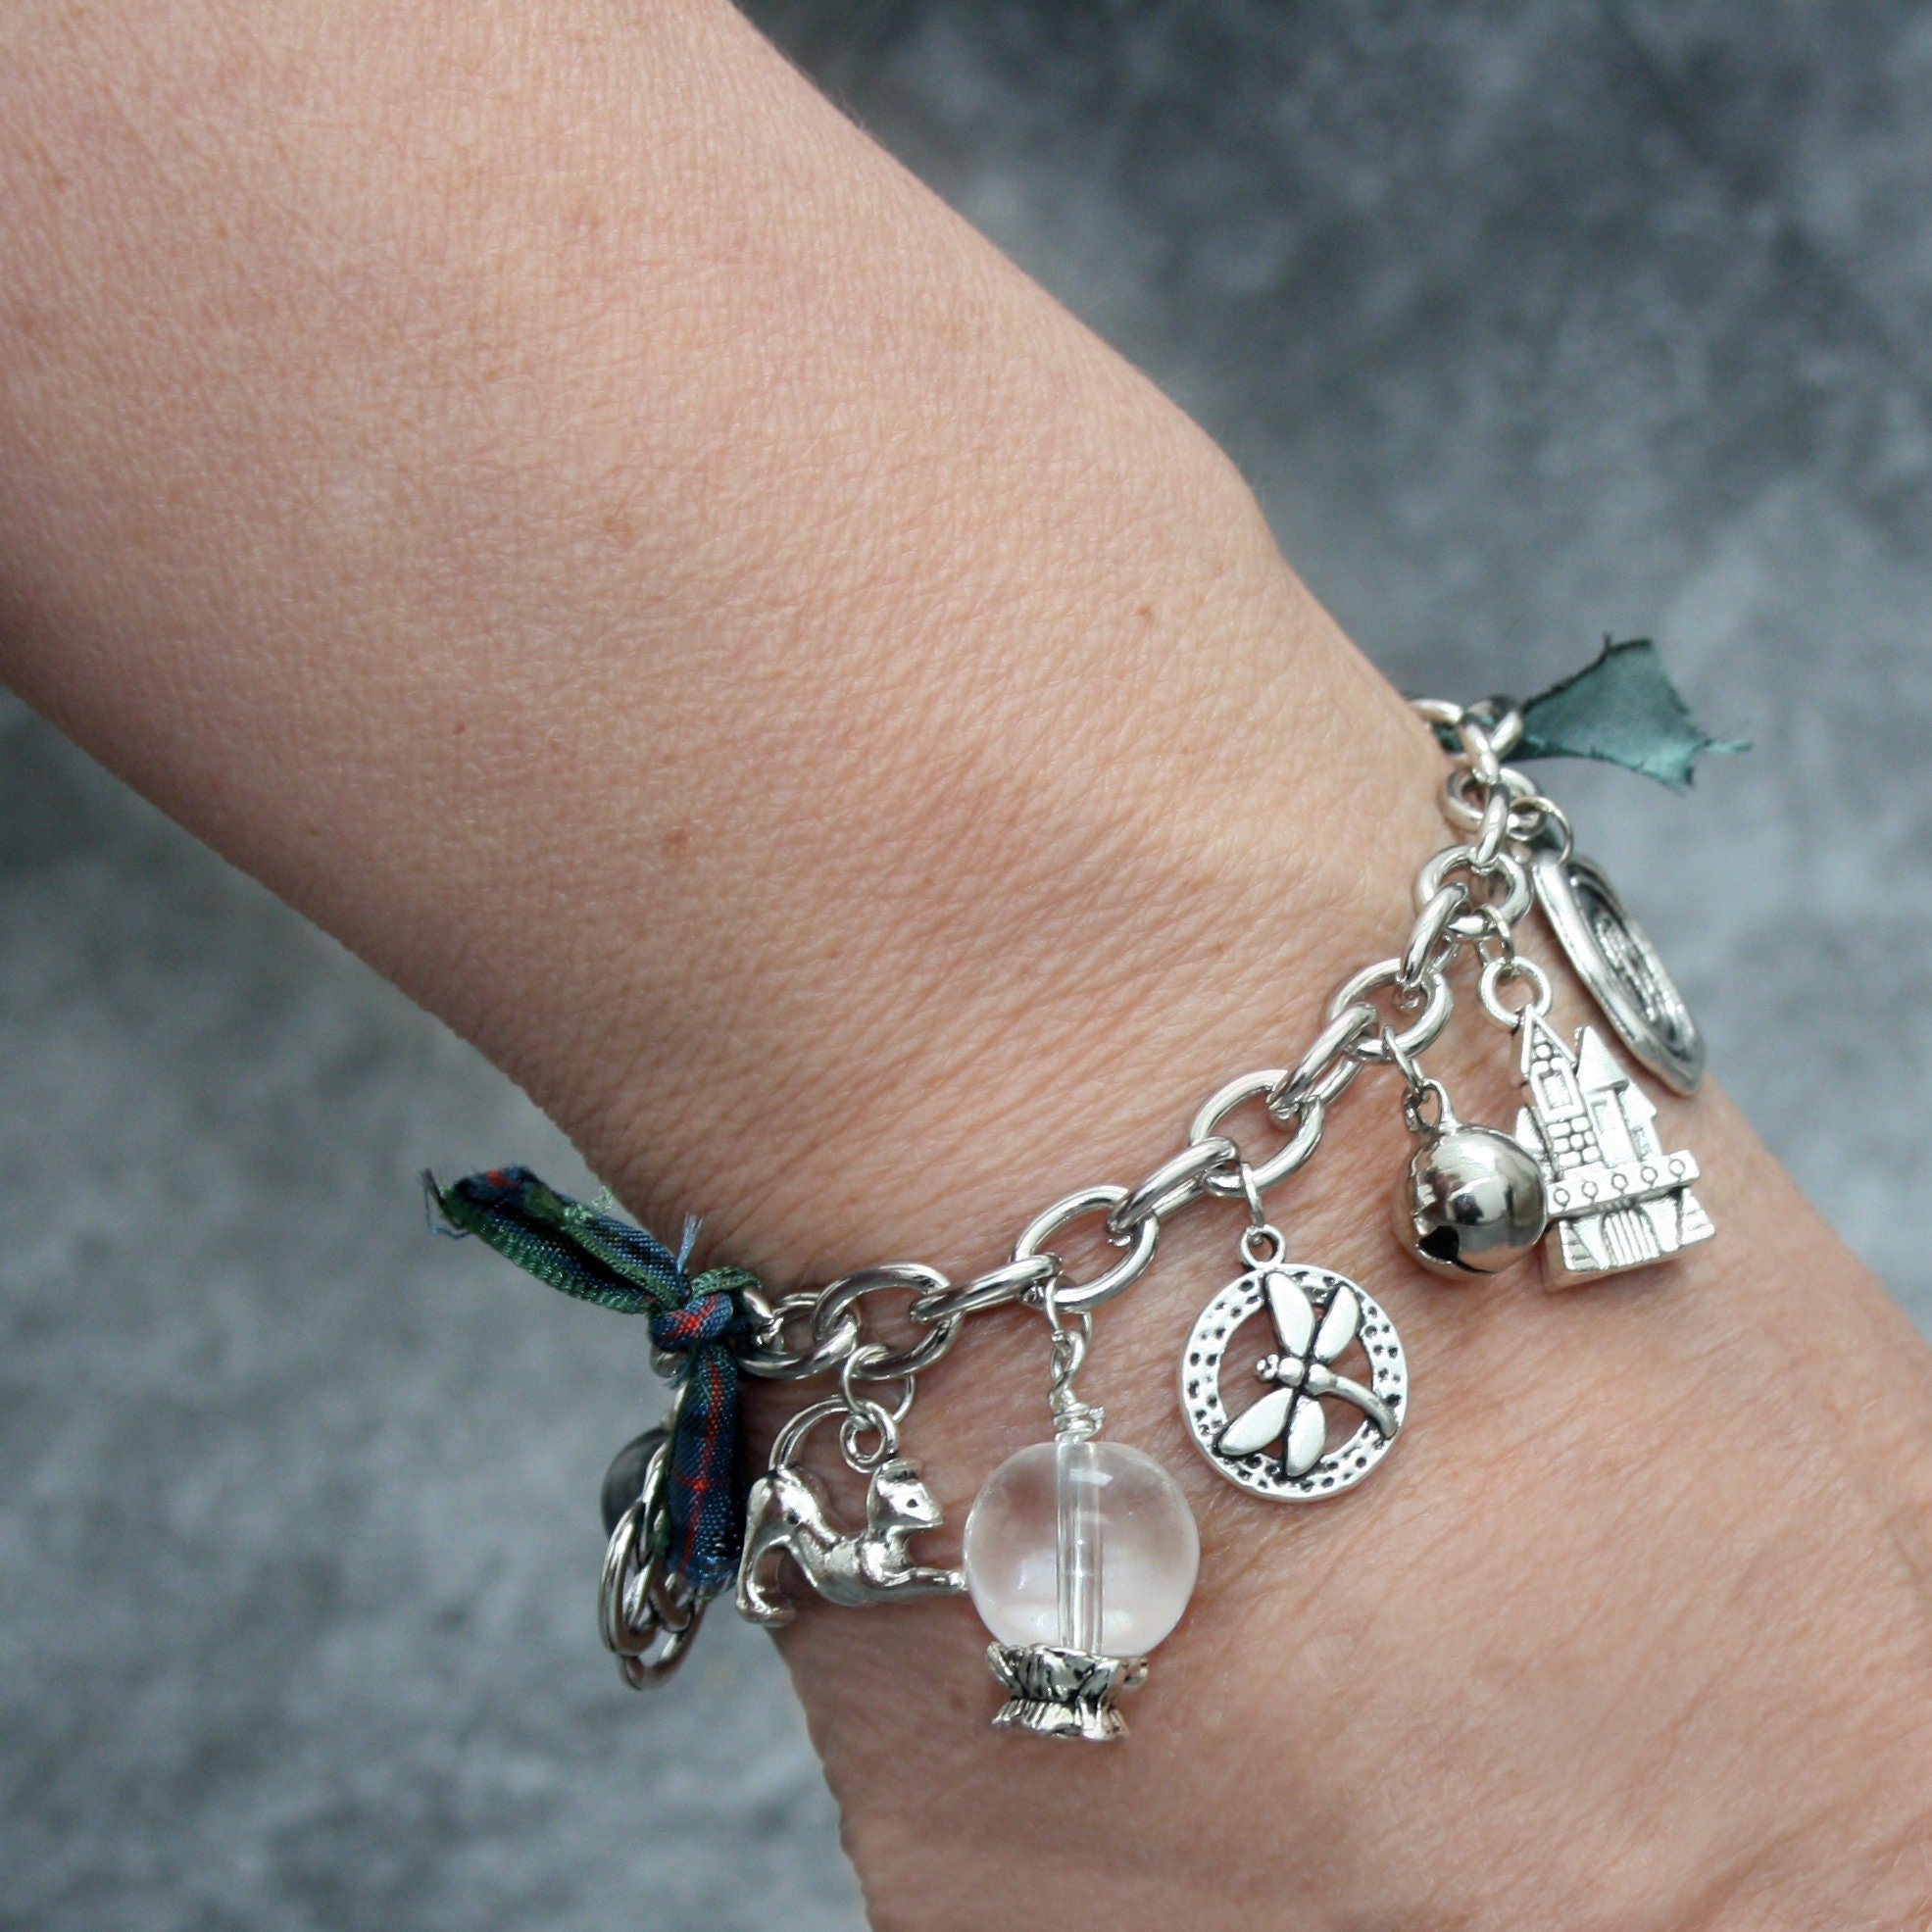 Witch , The Witches Spells + Stainless Steel + Charm Bracelets + Women's + Charm Bracelets